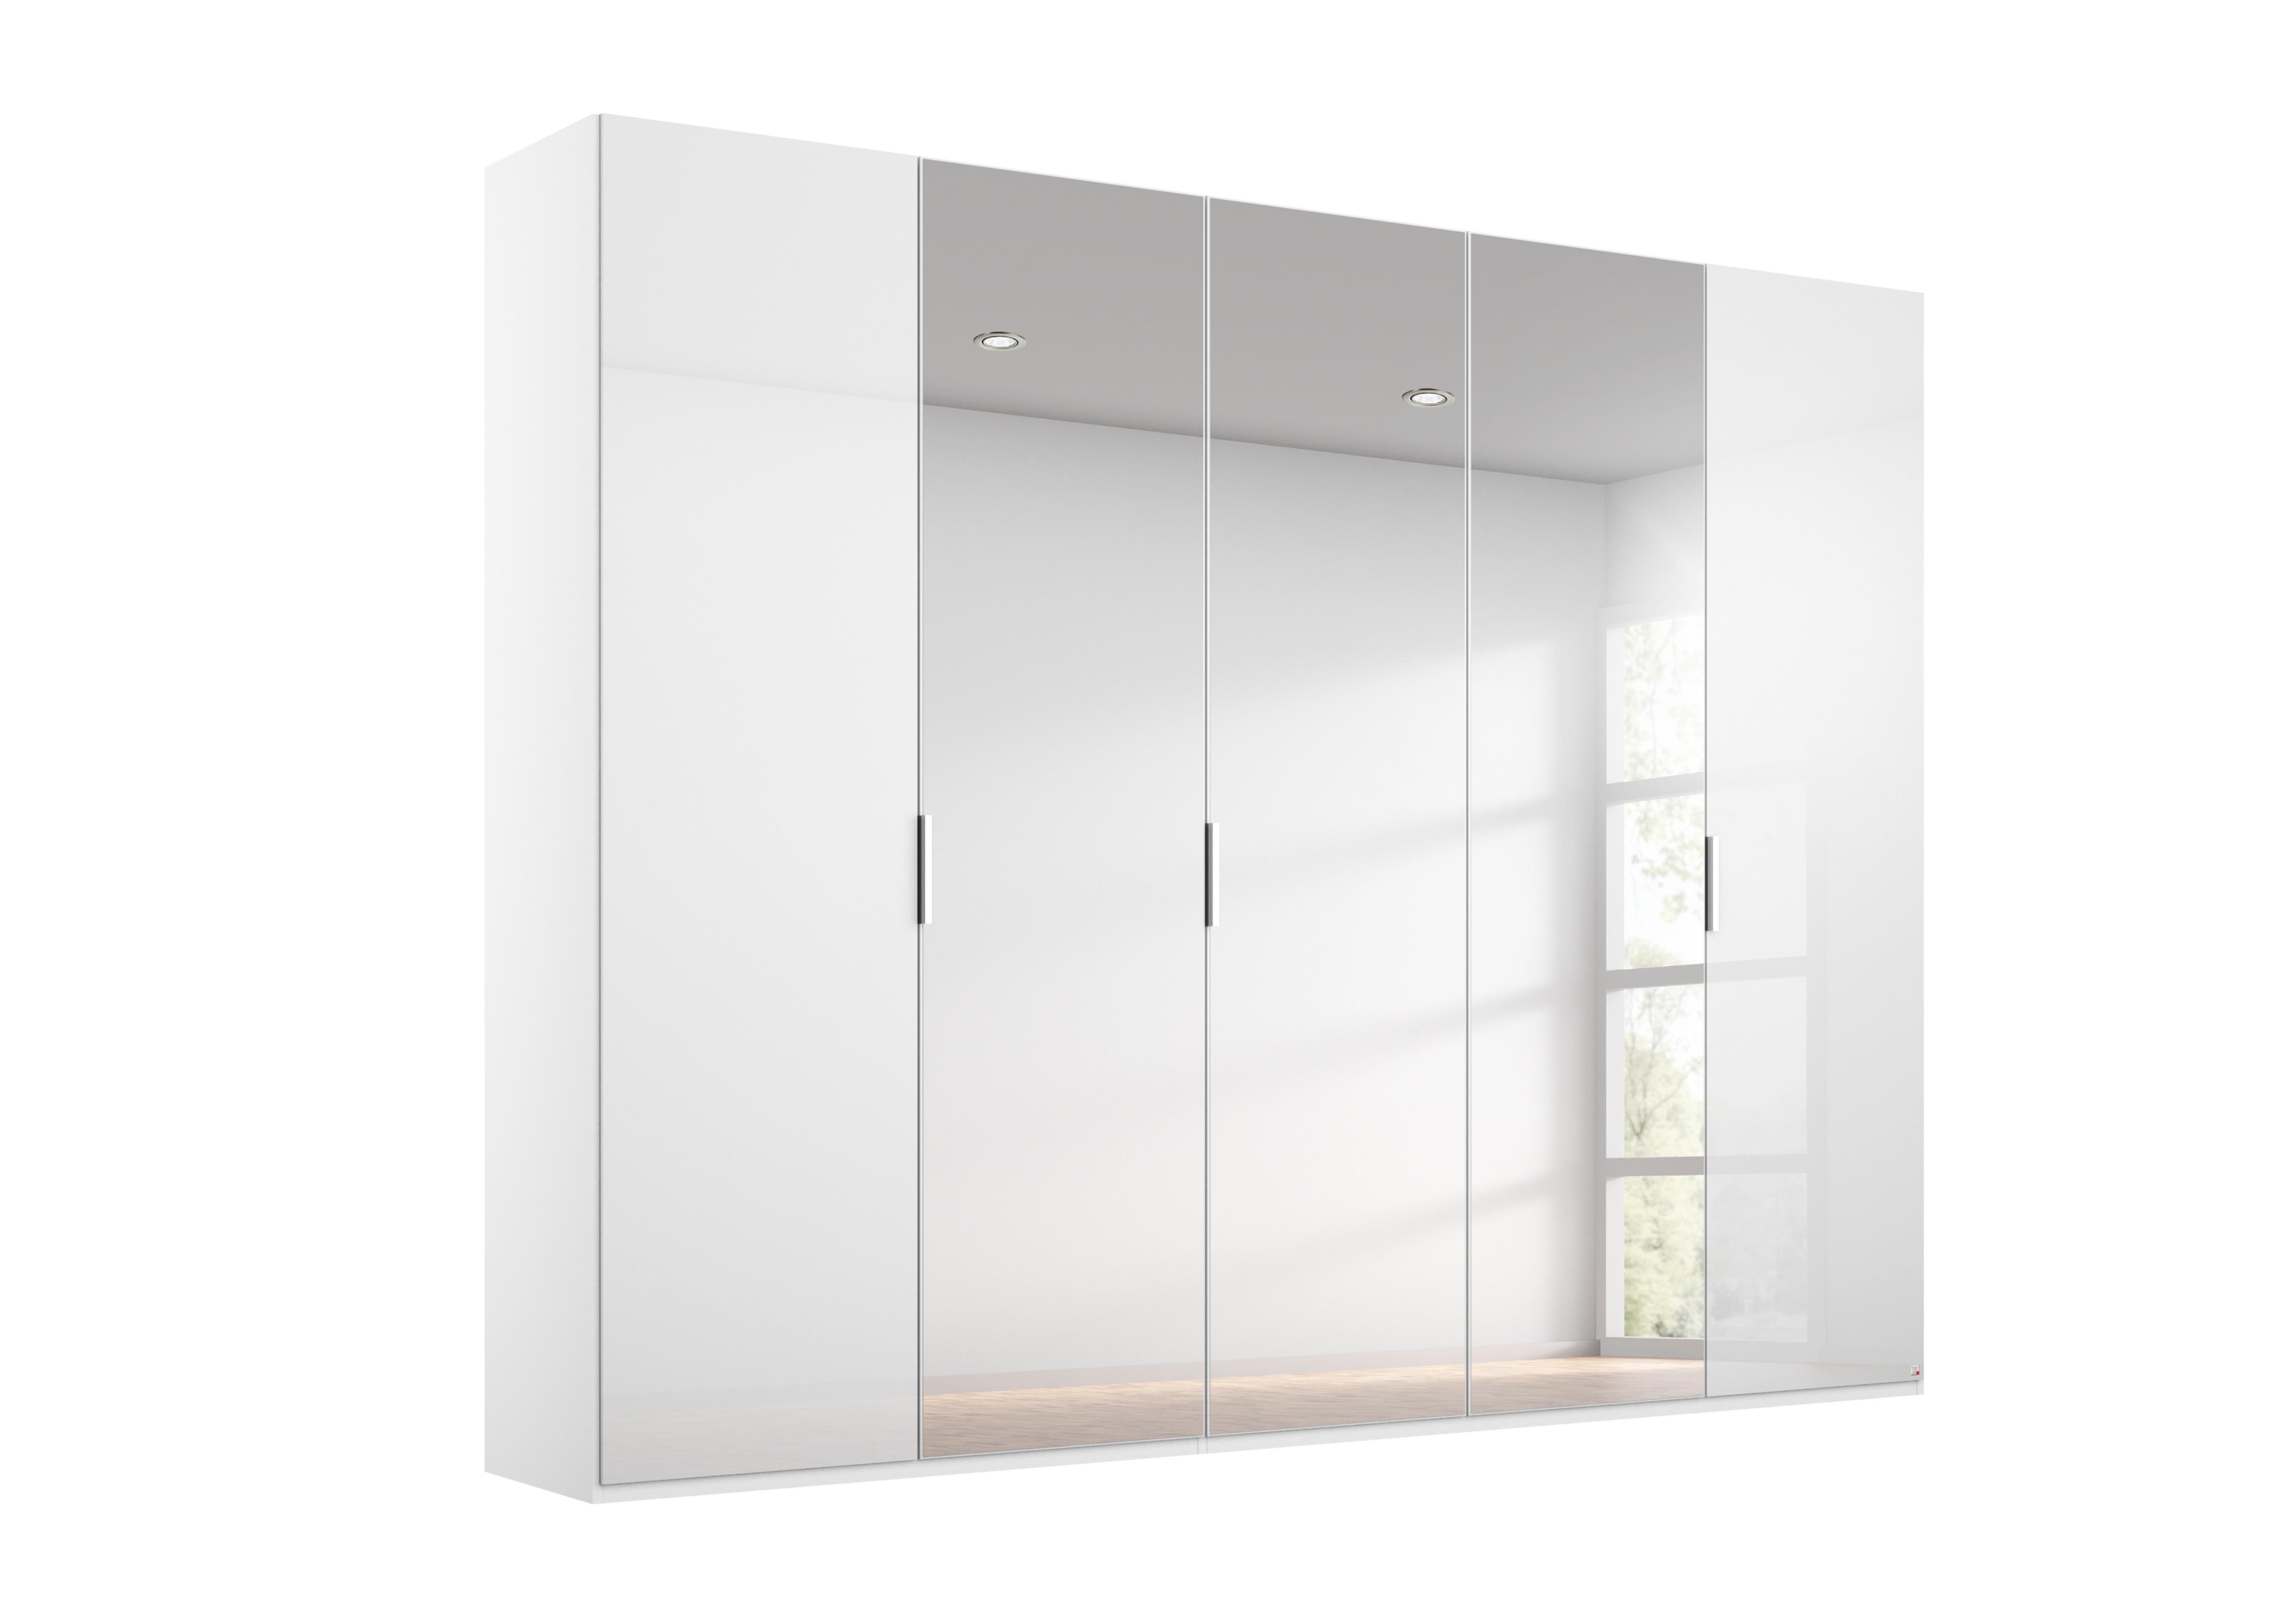 Formes Glass 5 Door Hinged Wardrobe with 3 Mirrors in A131b White White Front on Furniture Village